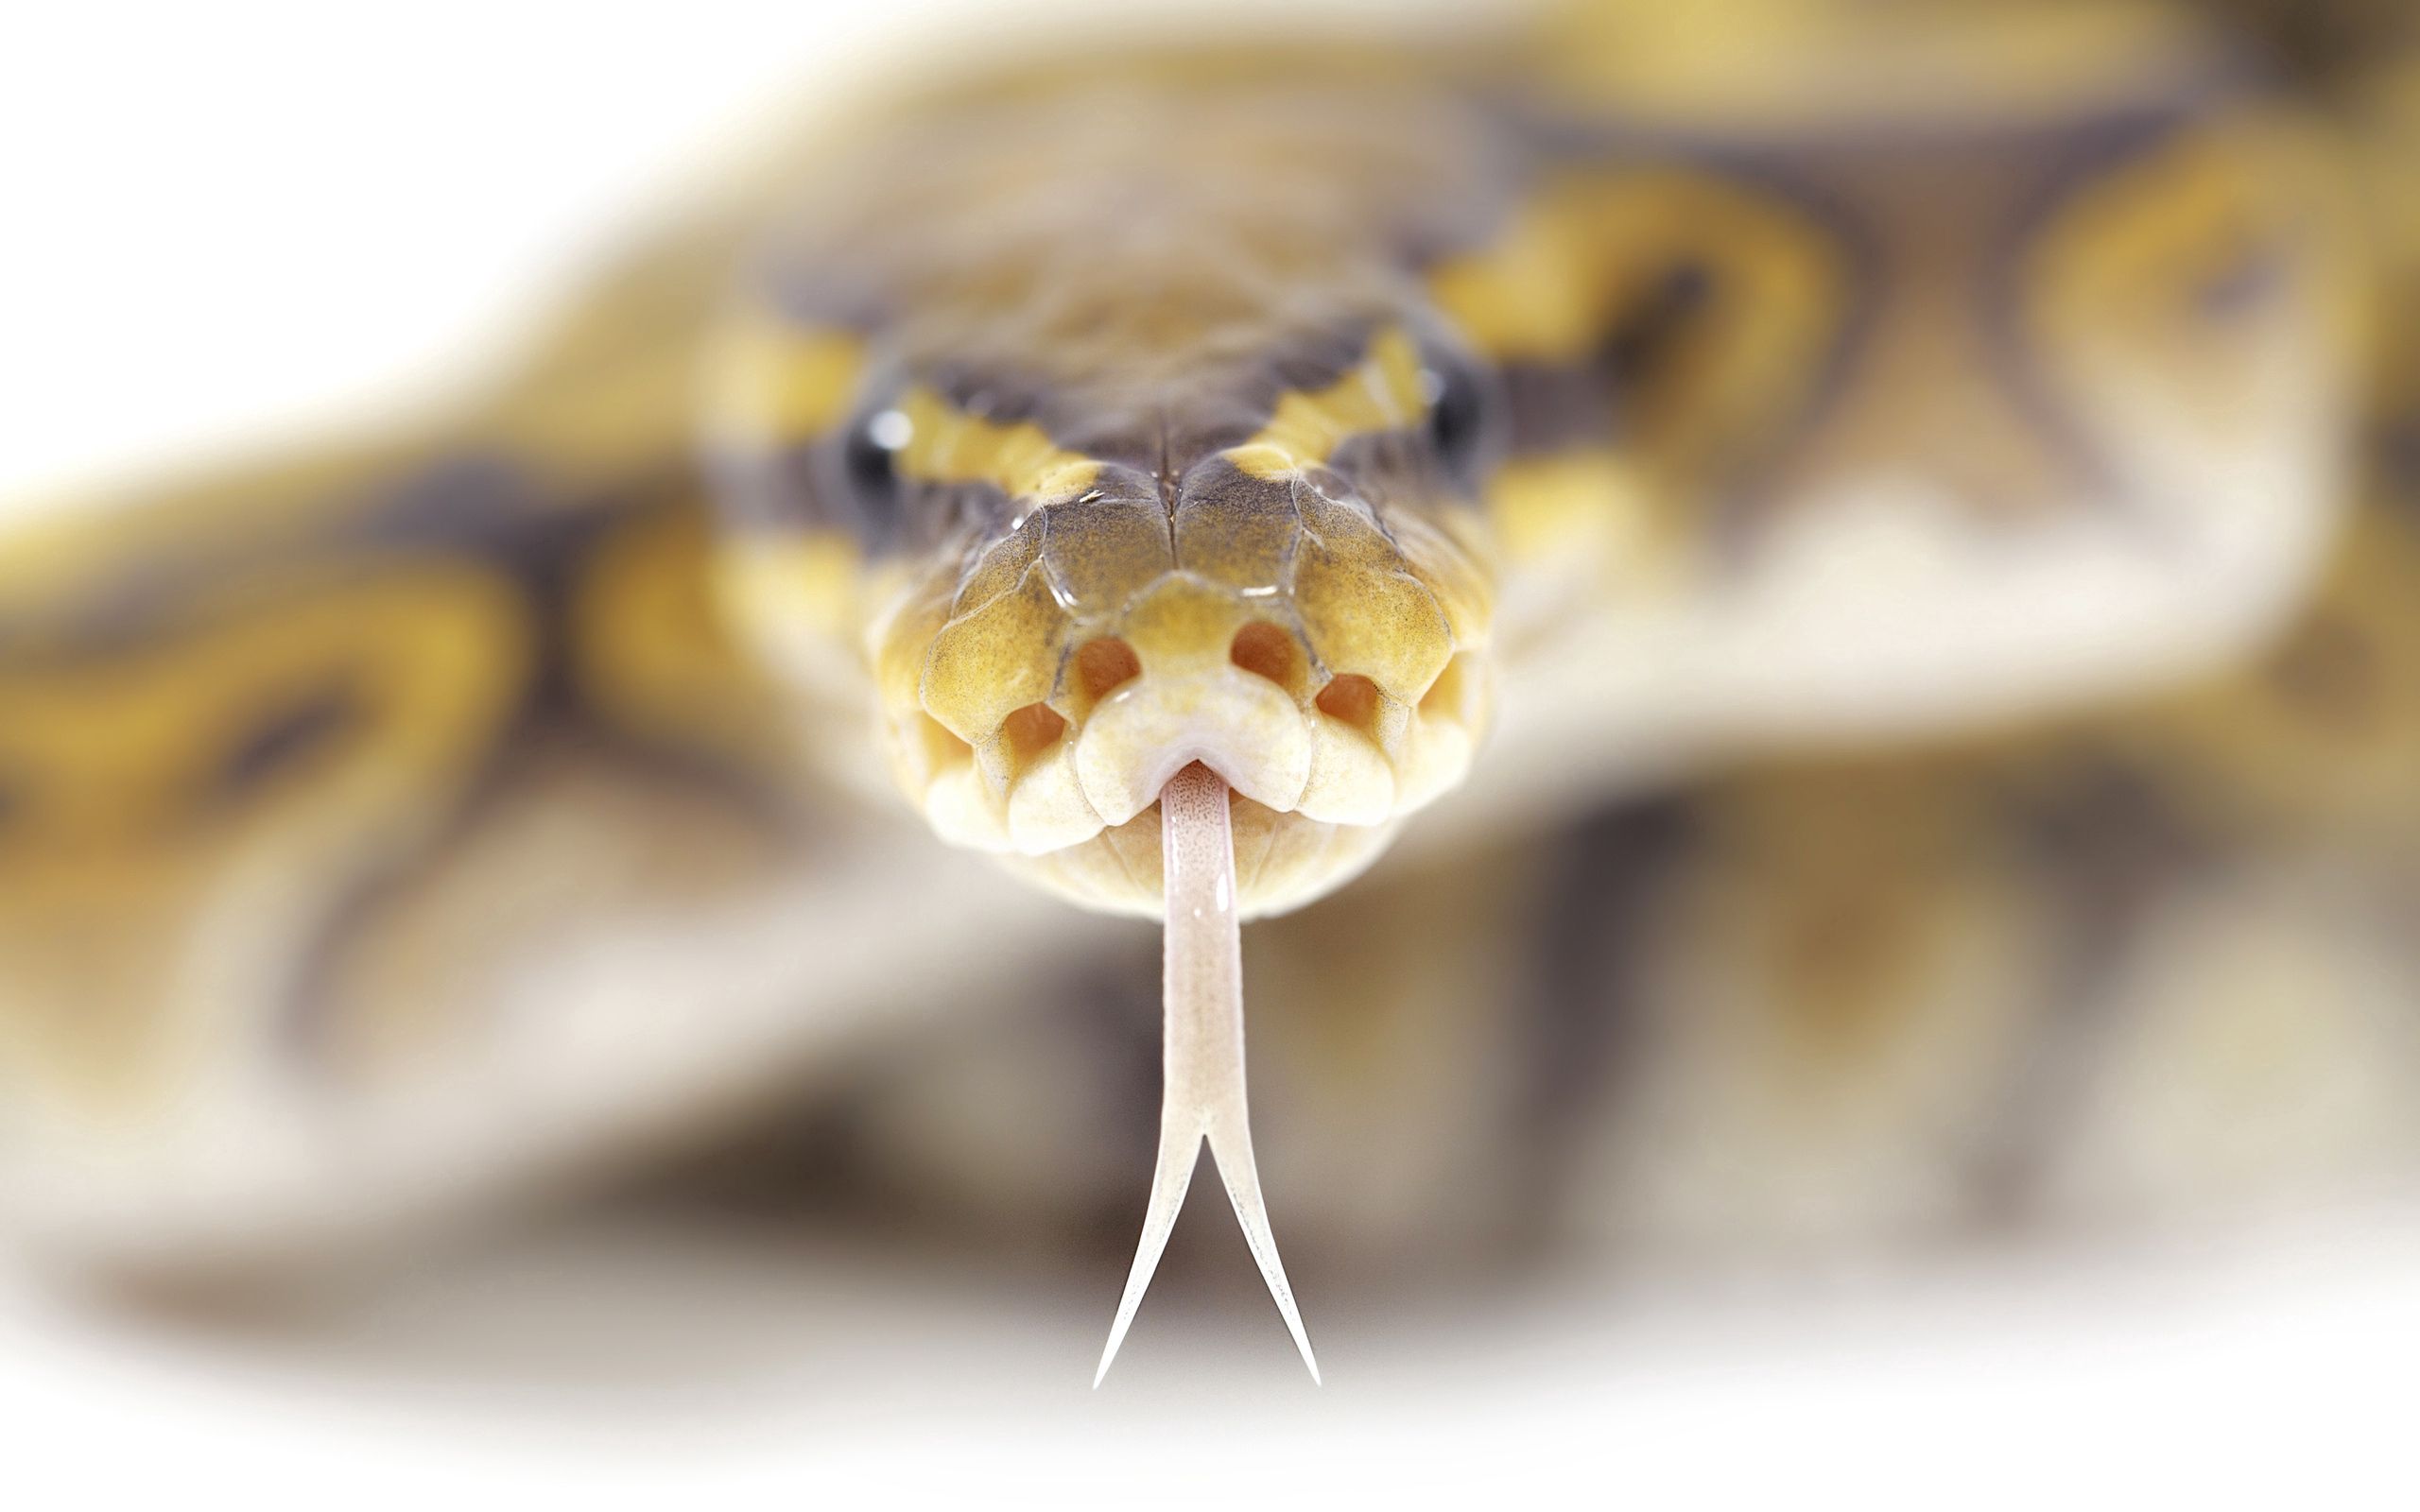 snake, animals, stains, spots, language, tongue, poison Full HD